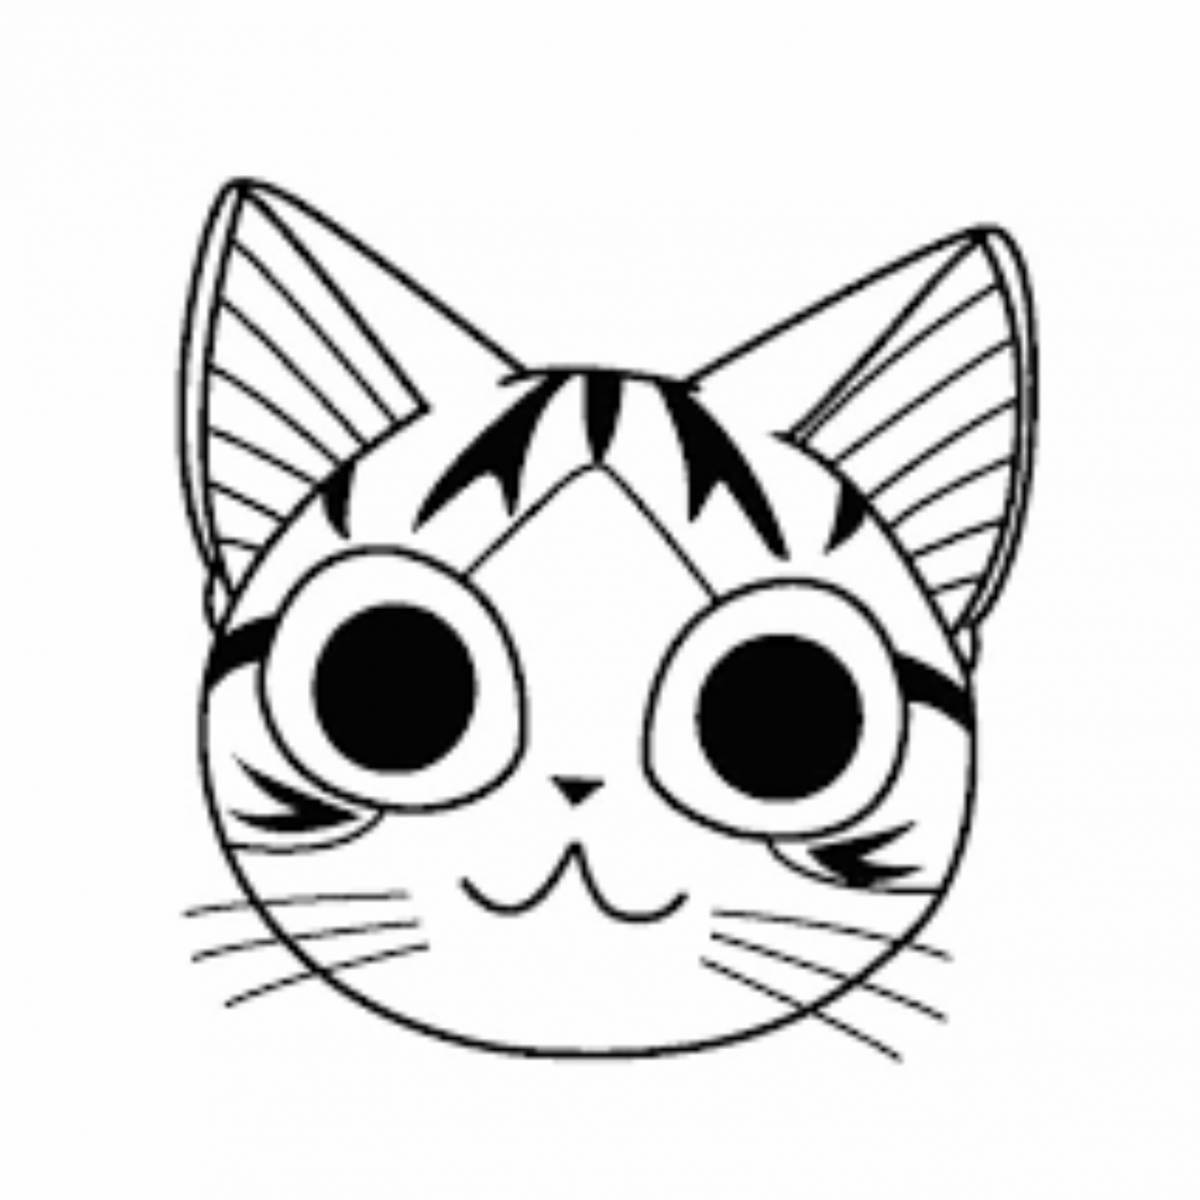 Fabulous cat face coloring pages for kids